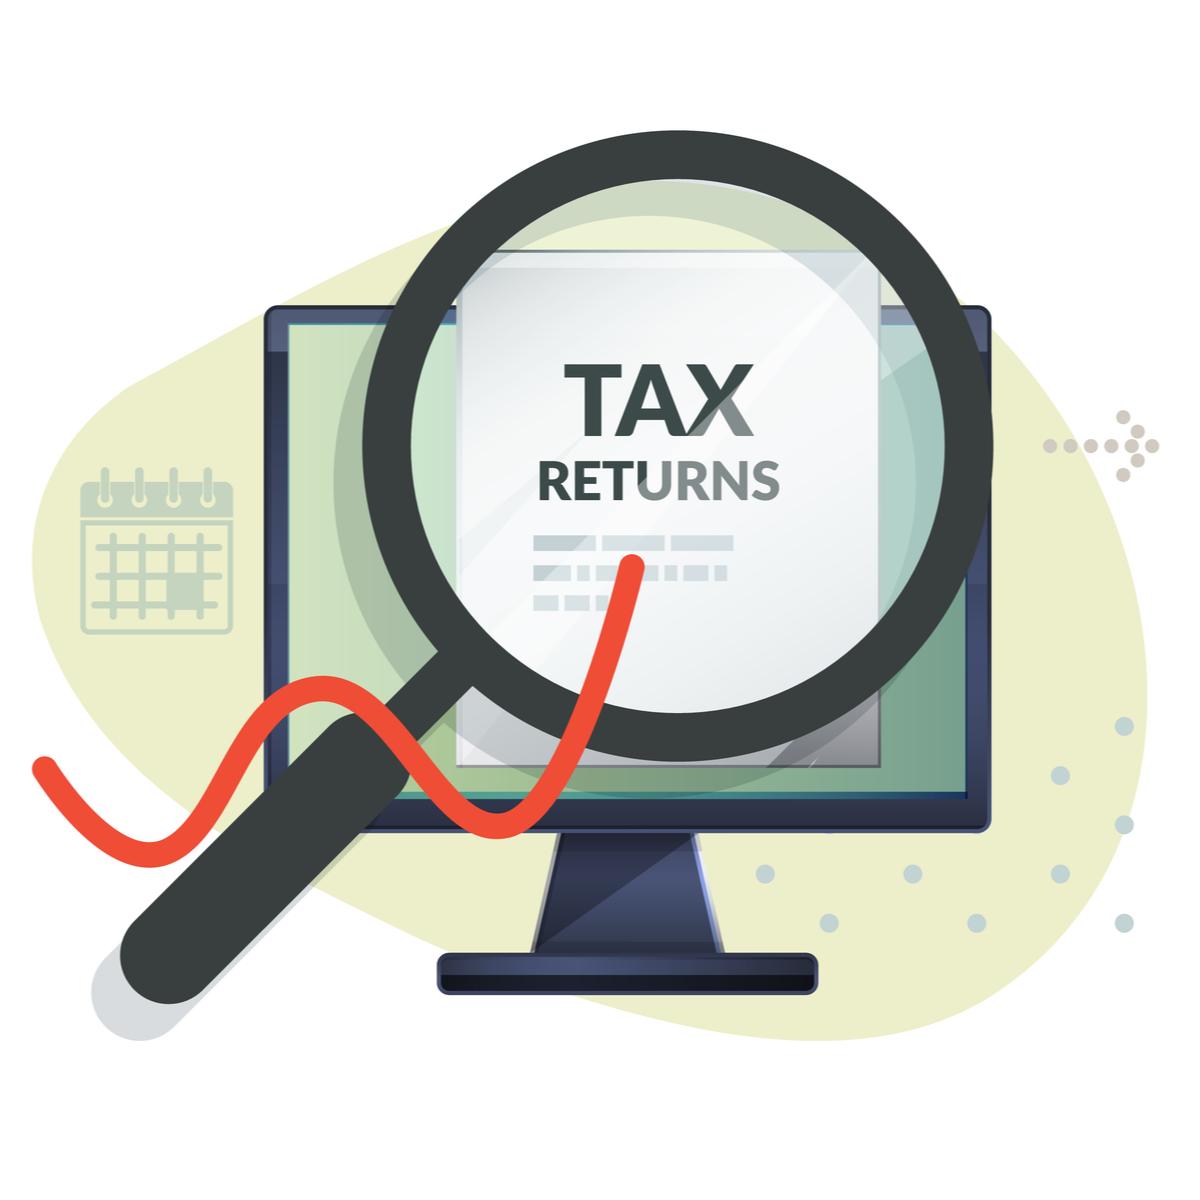 Compliance Calendar: Important Tax Dates for 2020 [After Coronavirus Changes]